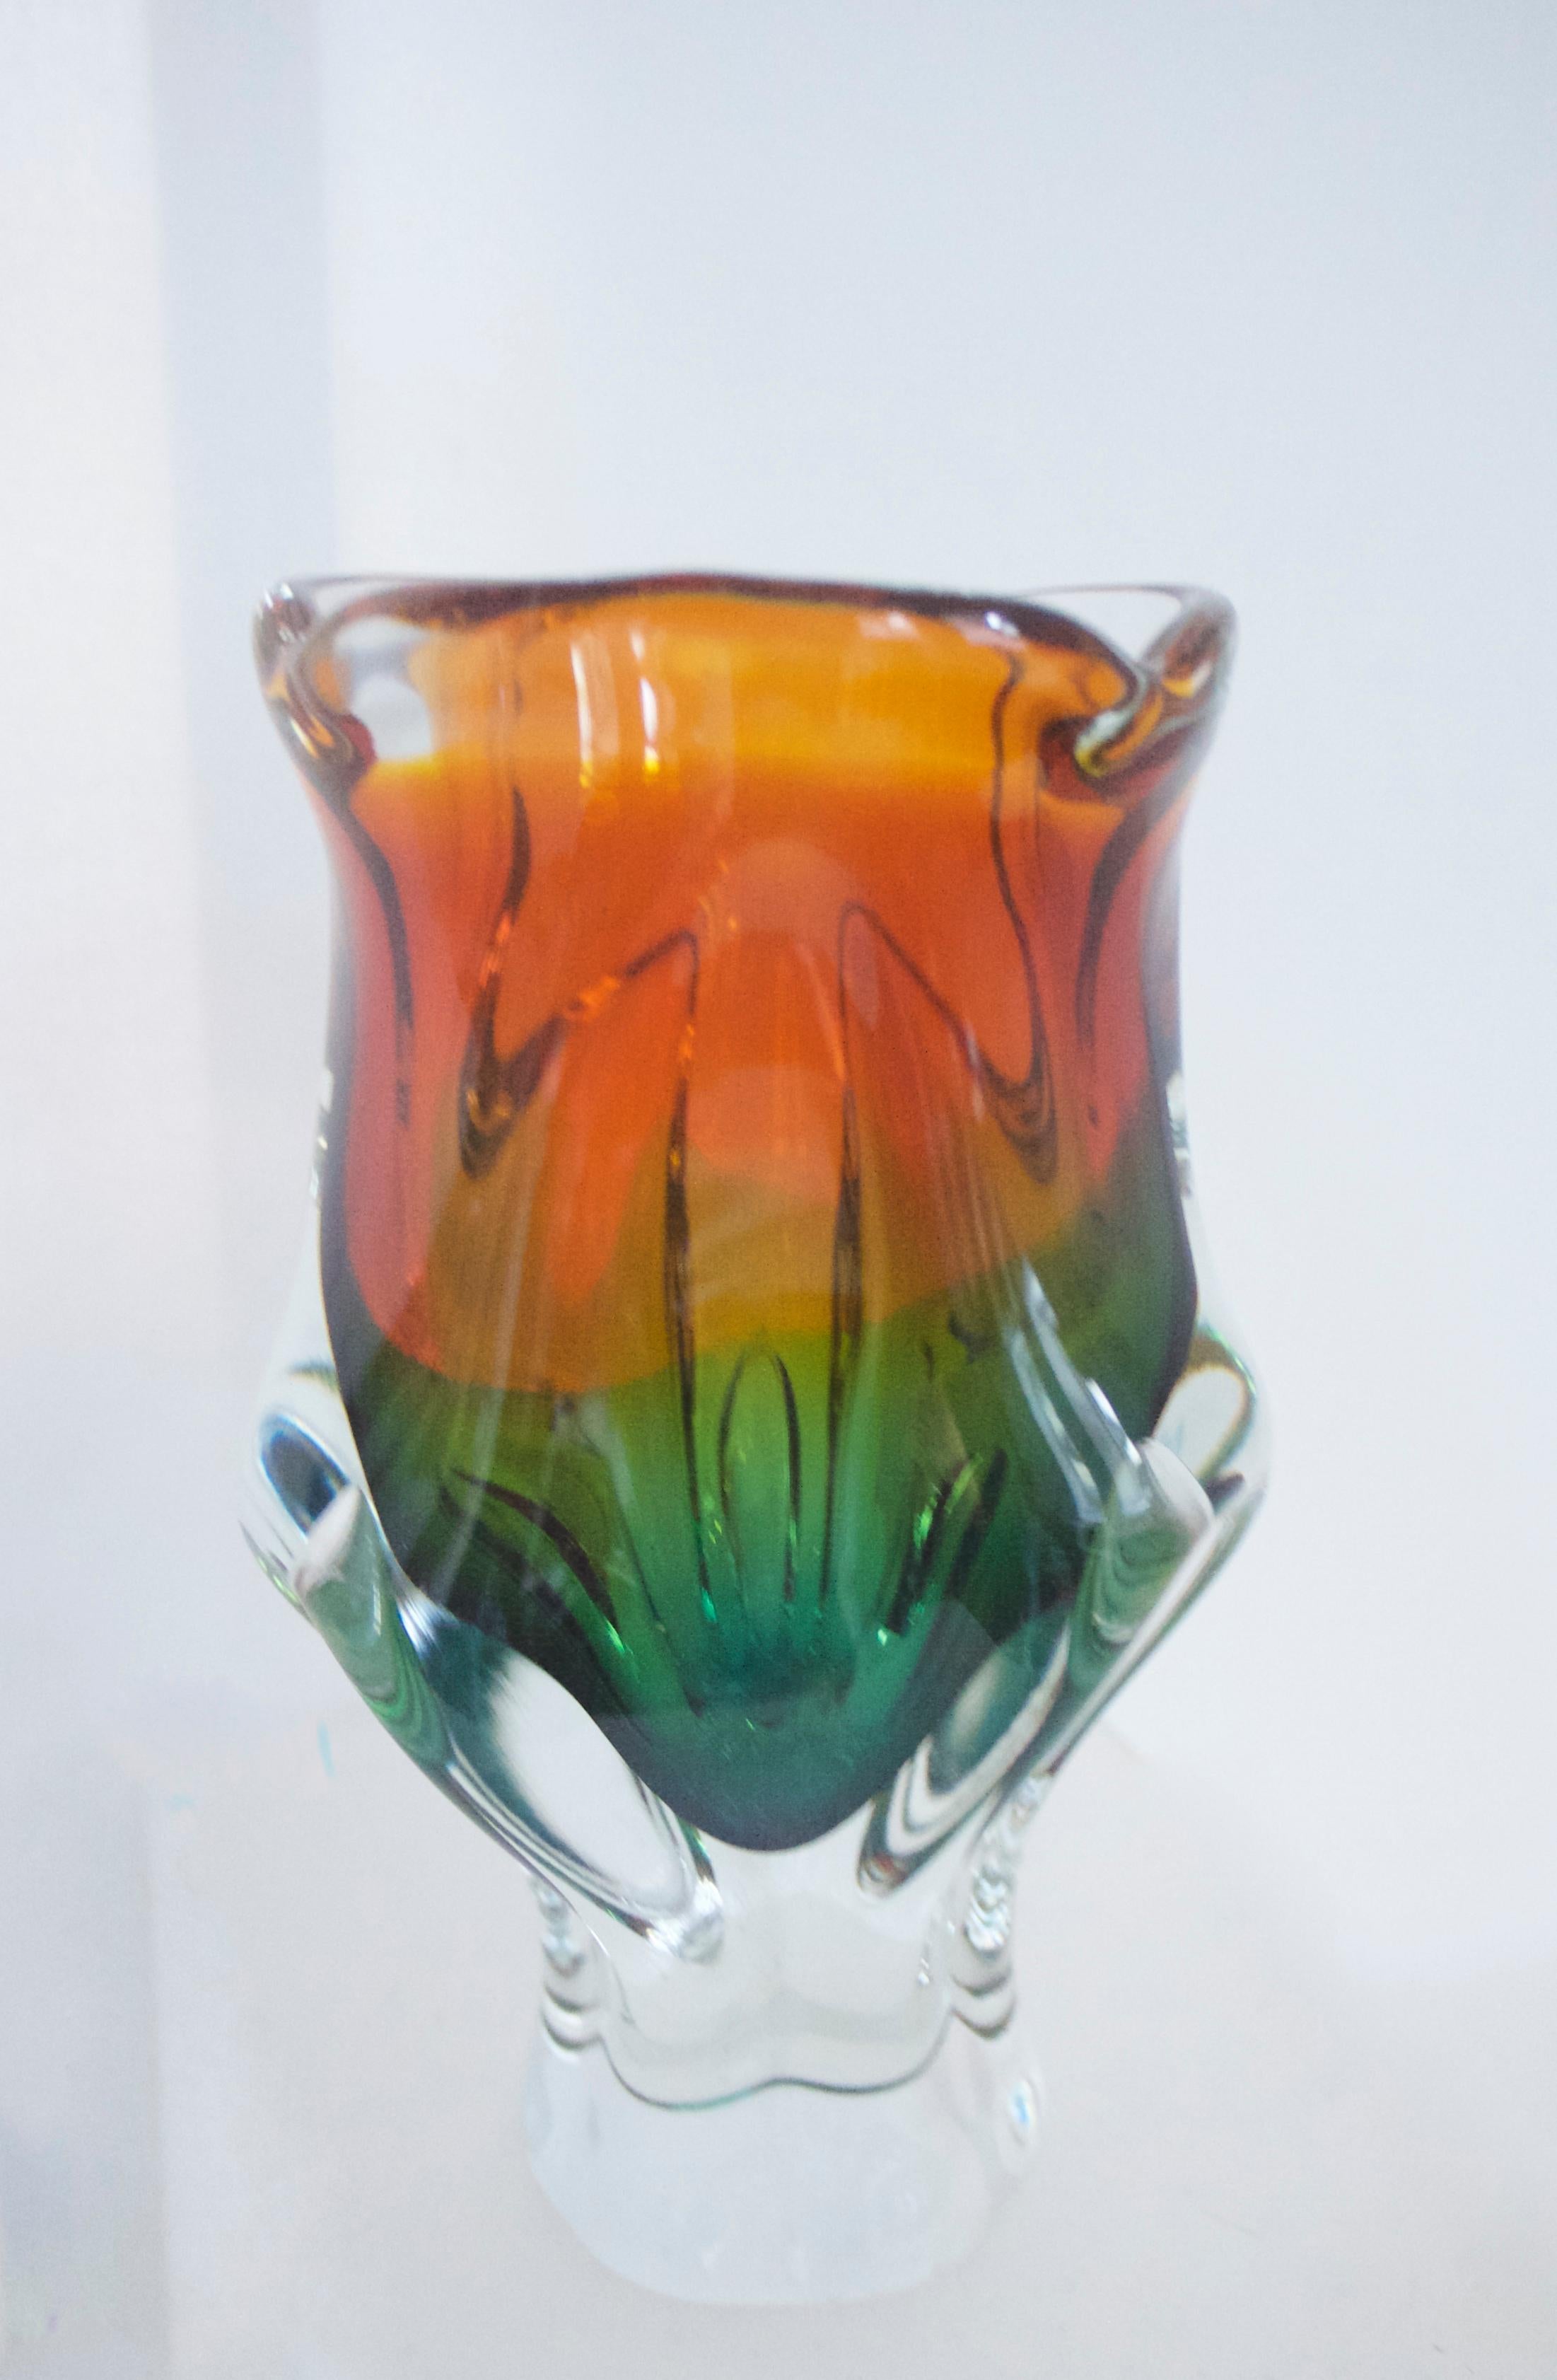 Blown glass vase designed by Josef Hospodka, Chribska glassworks,

The Chribska glassworks, full name Sklarna Chribska, was founded in 1414, and stayed in production until very recently. In 1882 it was bought by the Mayer family. Chribska became